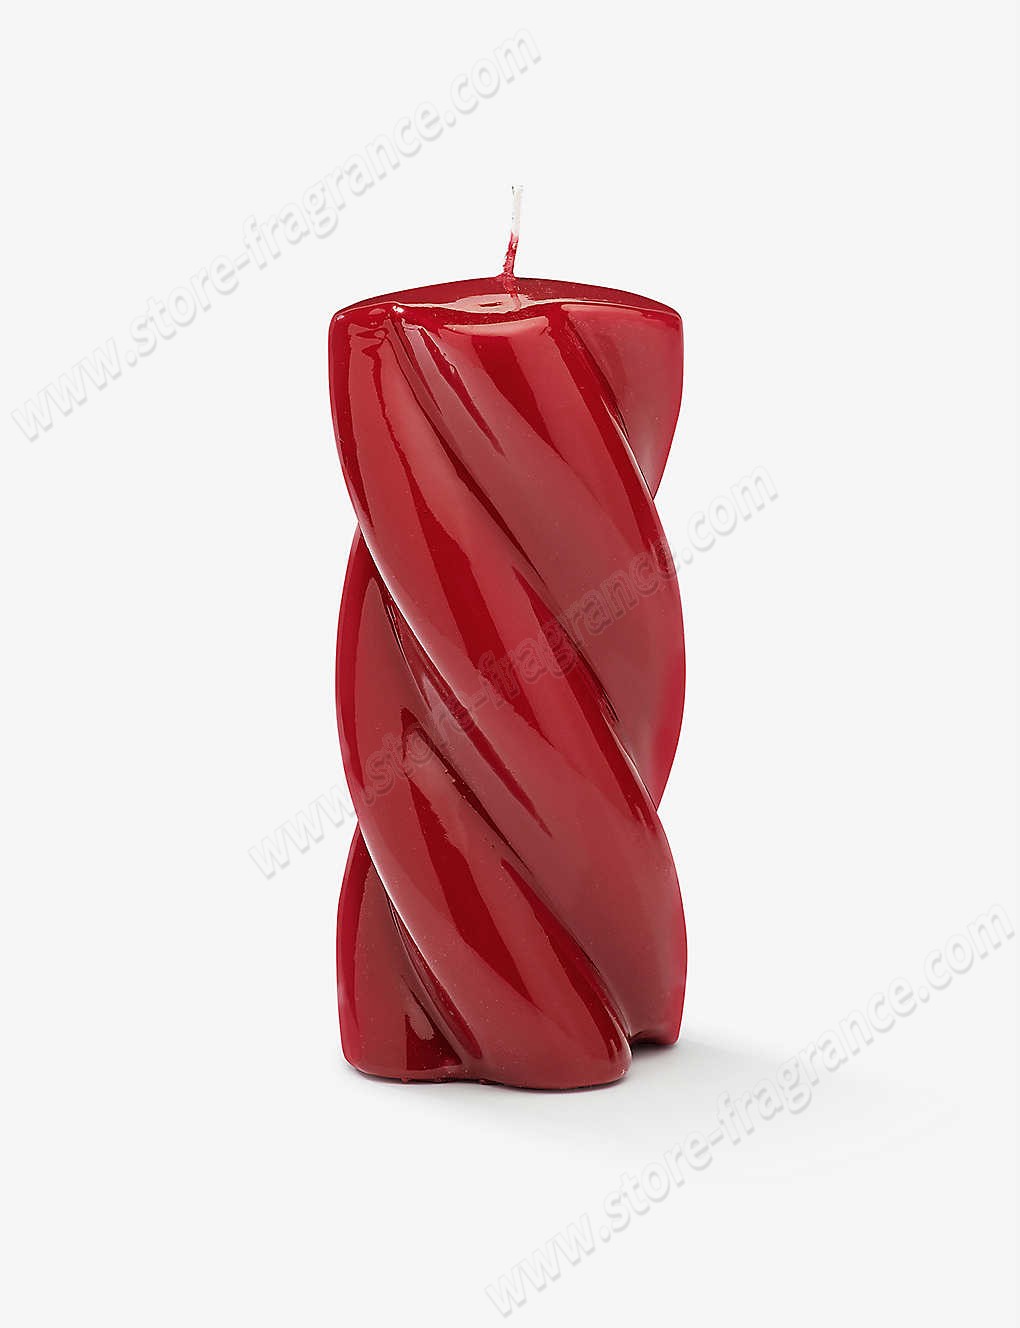 ANNA + NINA/Blunt Twisted paraffin candle 14cm Limit Offer - -0